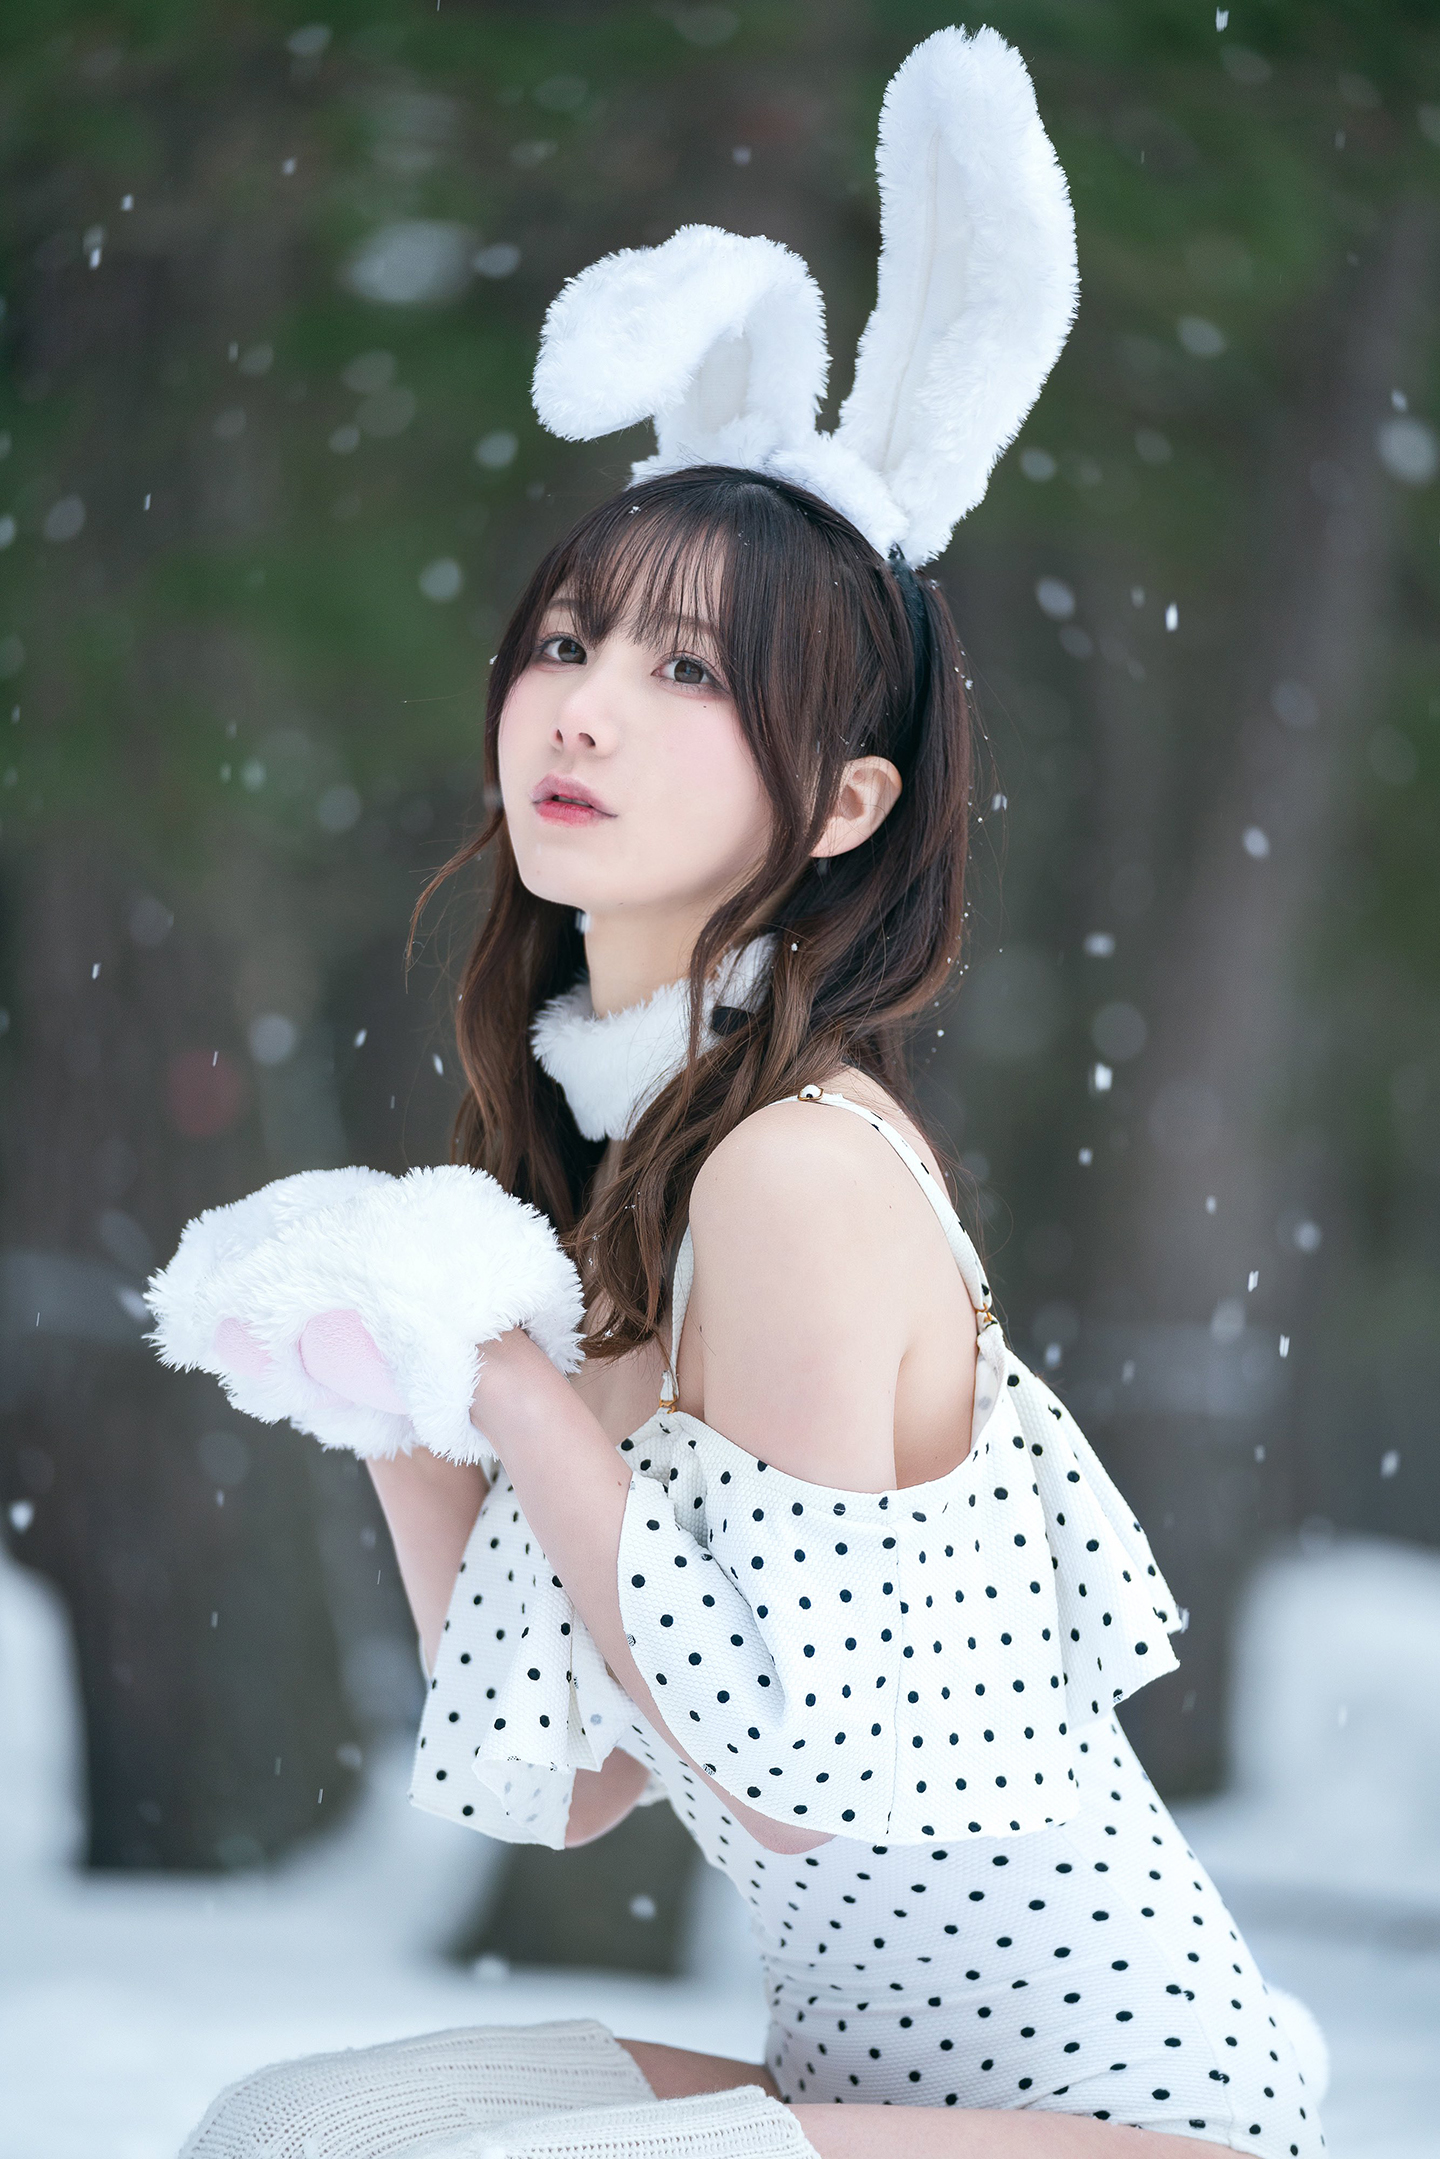 Women Asian Brunette Cosplay Dots White Clothing Rabbits Snow 1440x2159